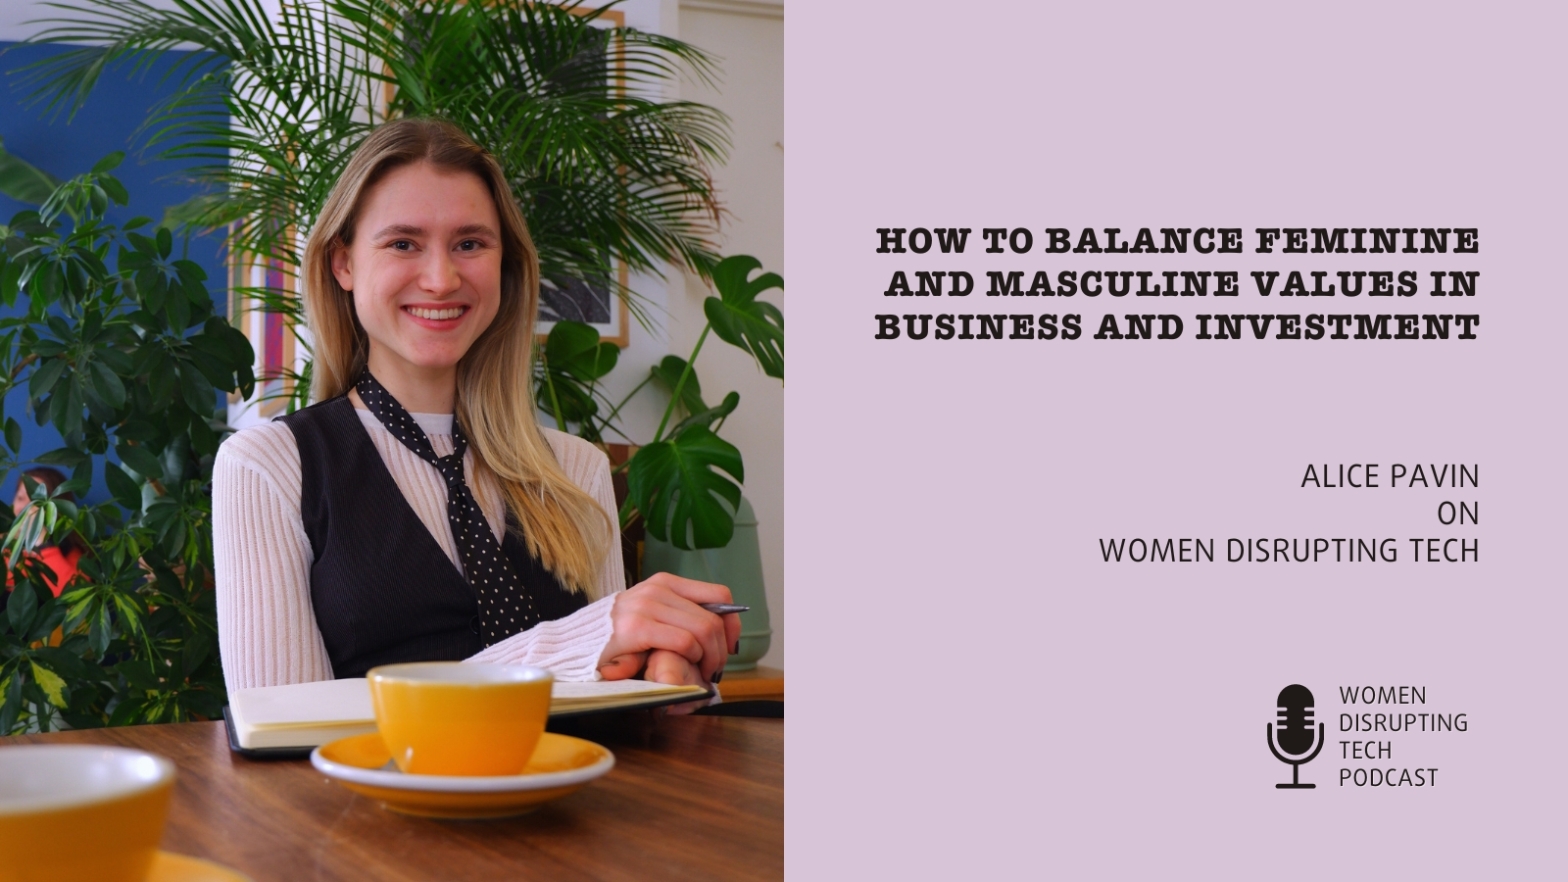 How To Balance Feminine and Masculine Values in Business and Investment with Alice Pavin | Show notes to episode 51 on Women Disrupting Tech